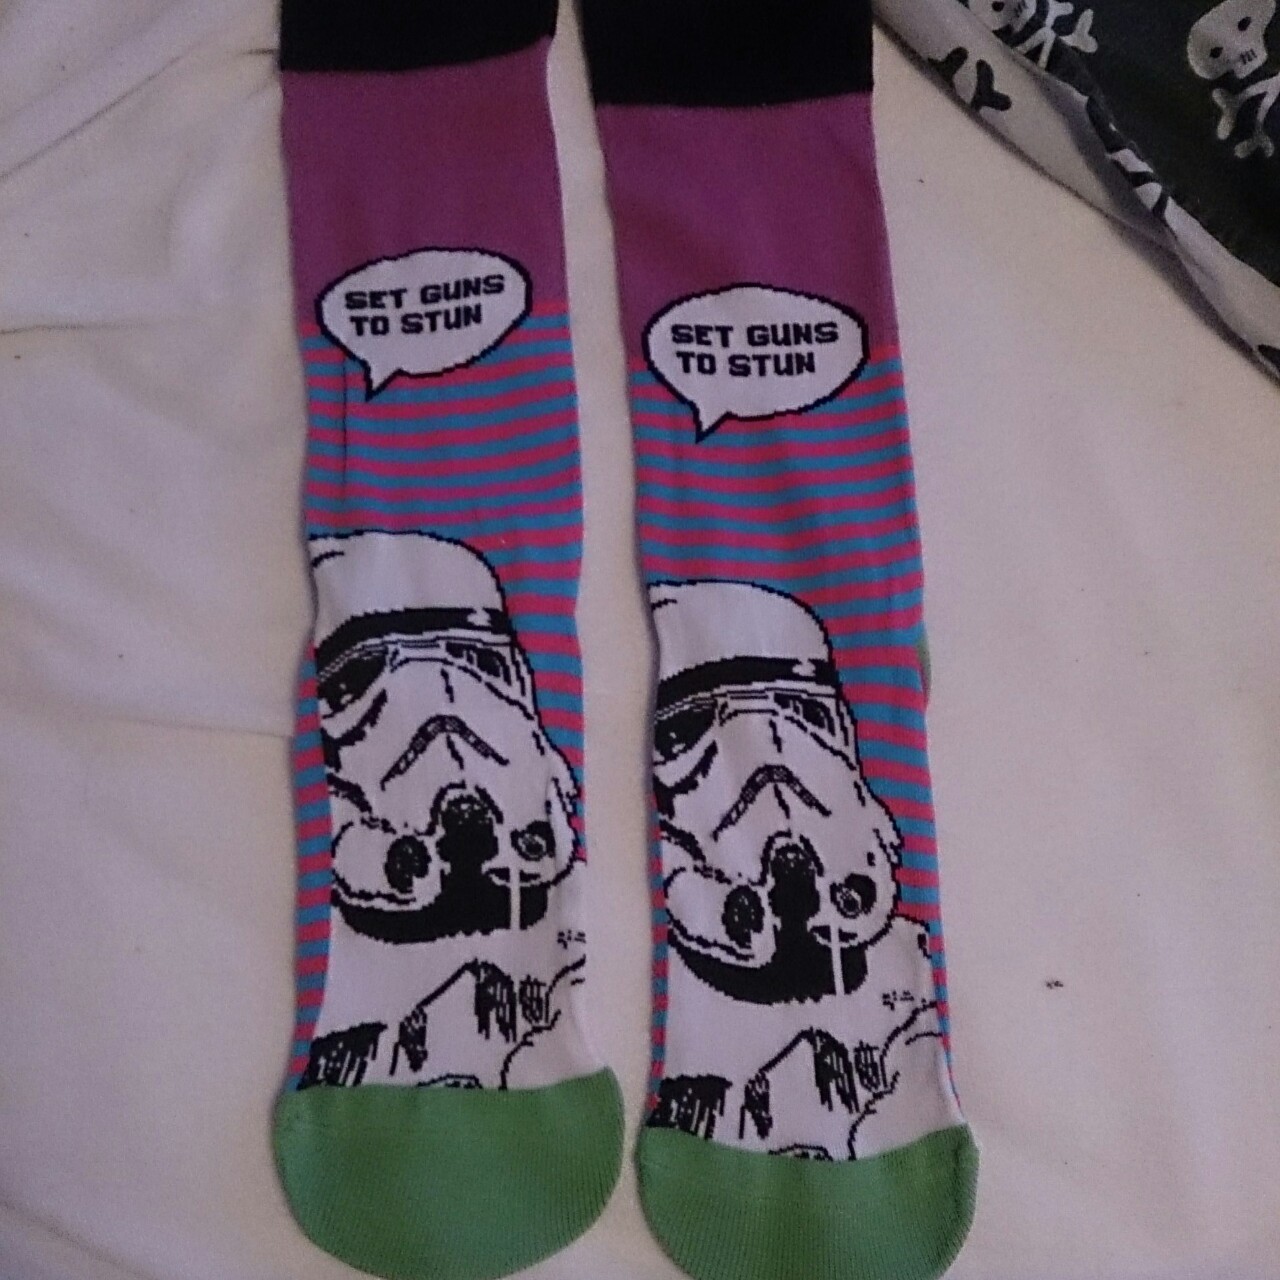 Day 1 &amp; 2 with the new Star wars socks 